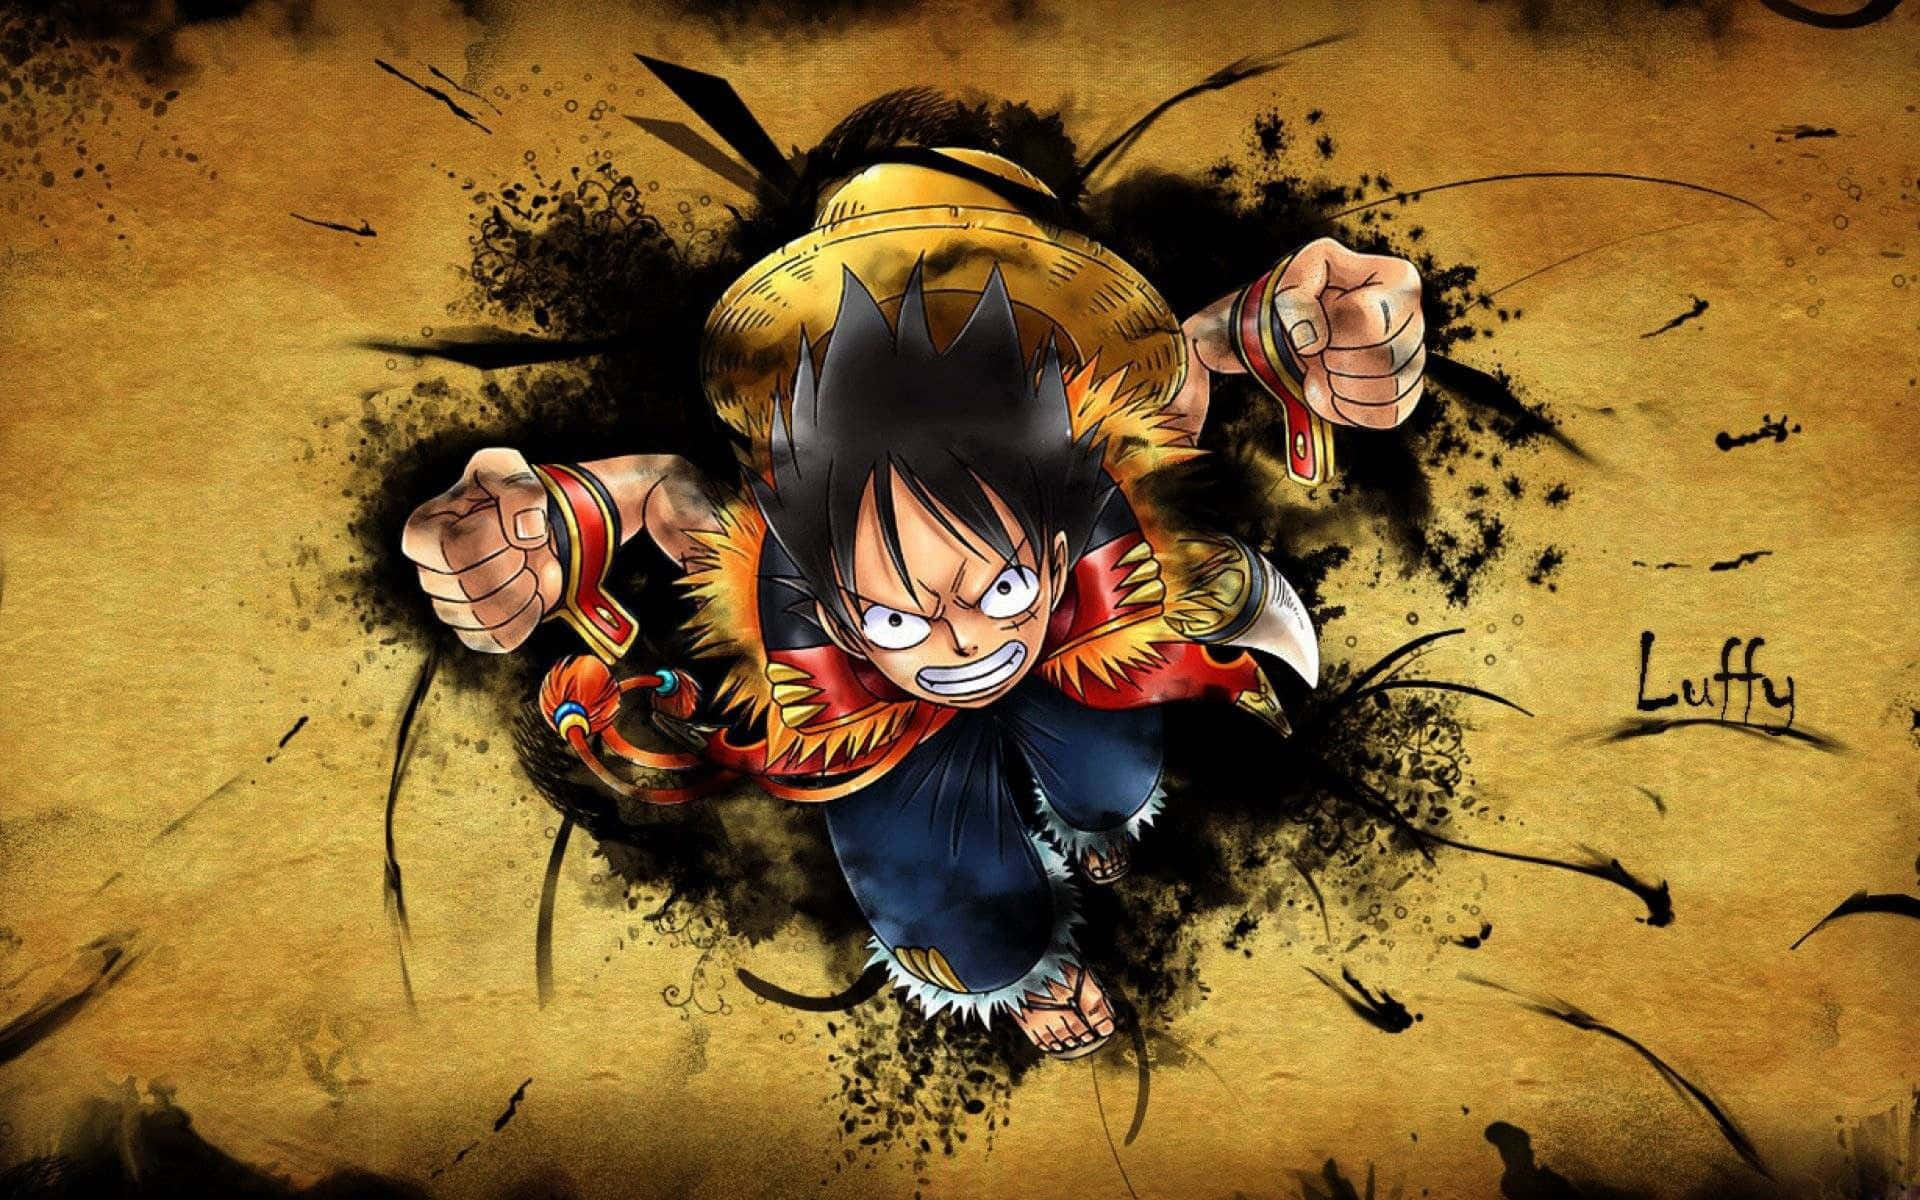 Cool Luffy Snapping His Fingers With Style Background